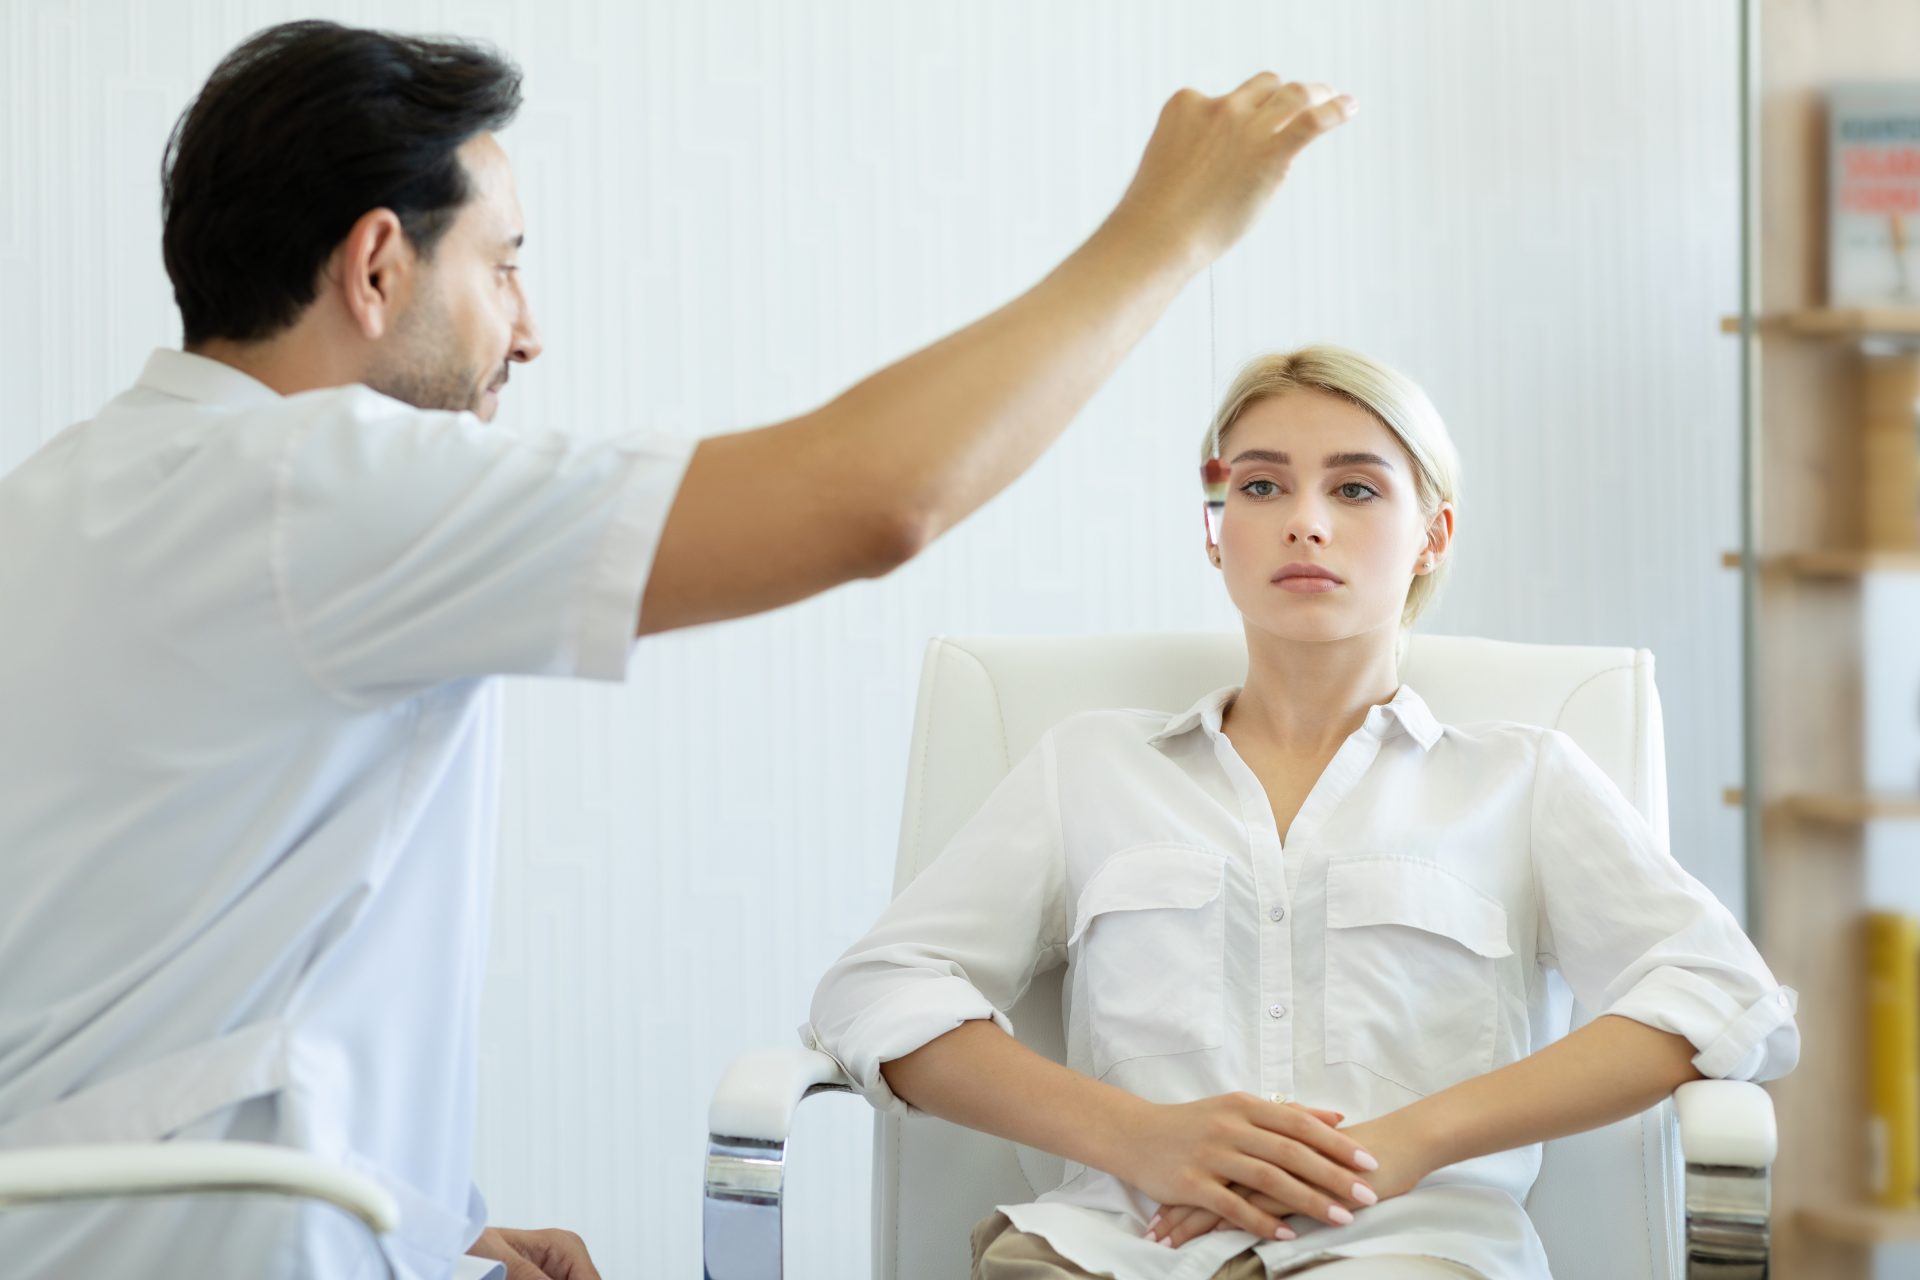 Would you trust hypnosis instead of anesthesia?